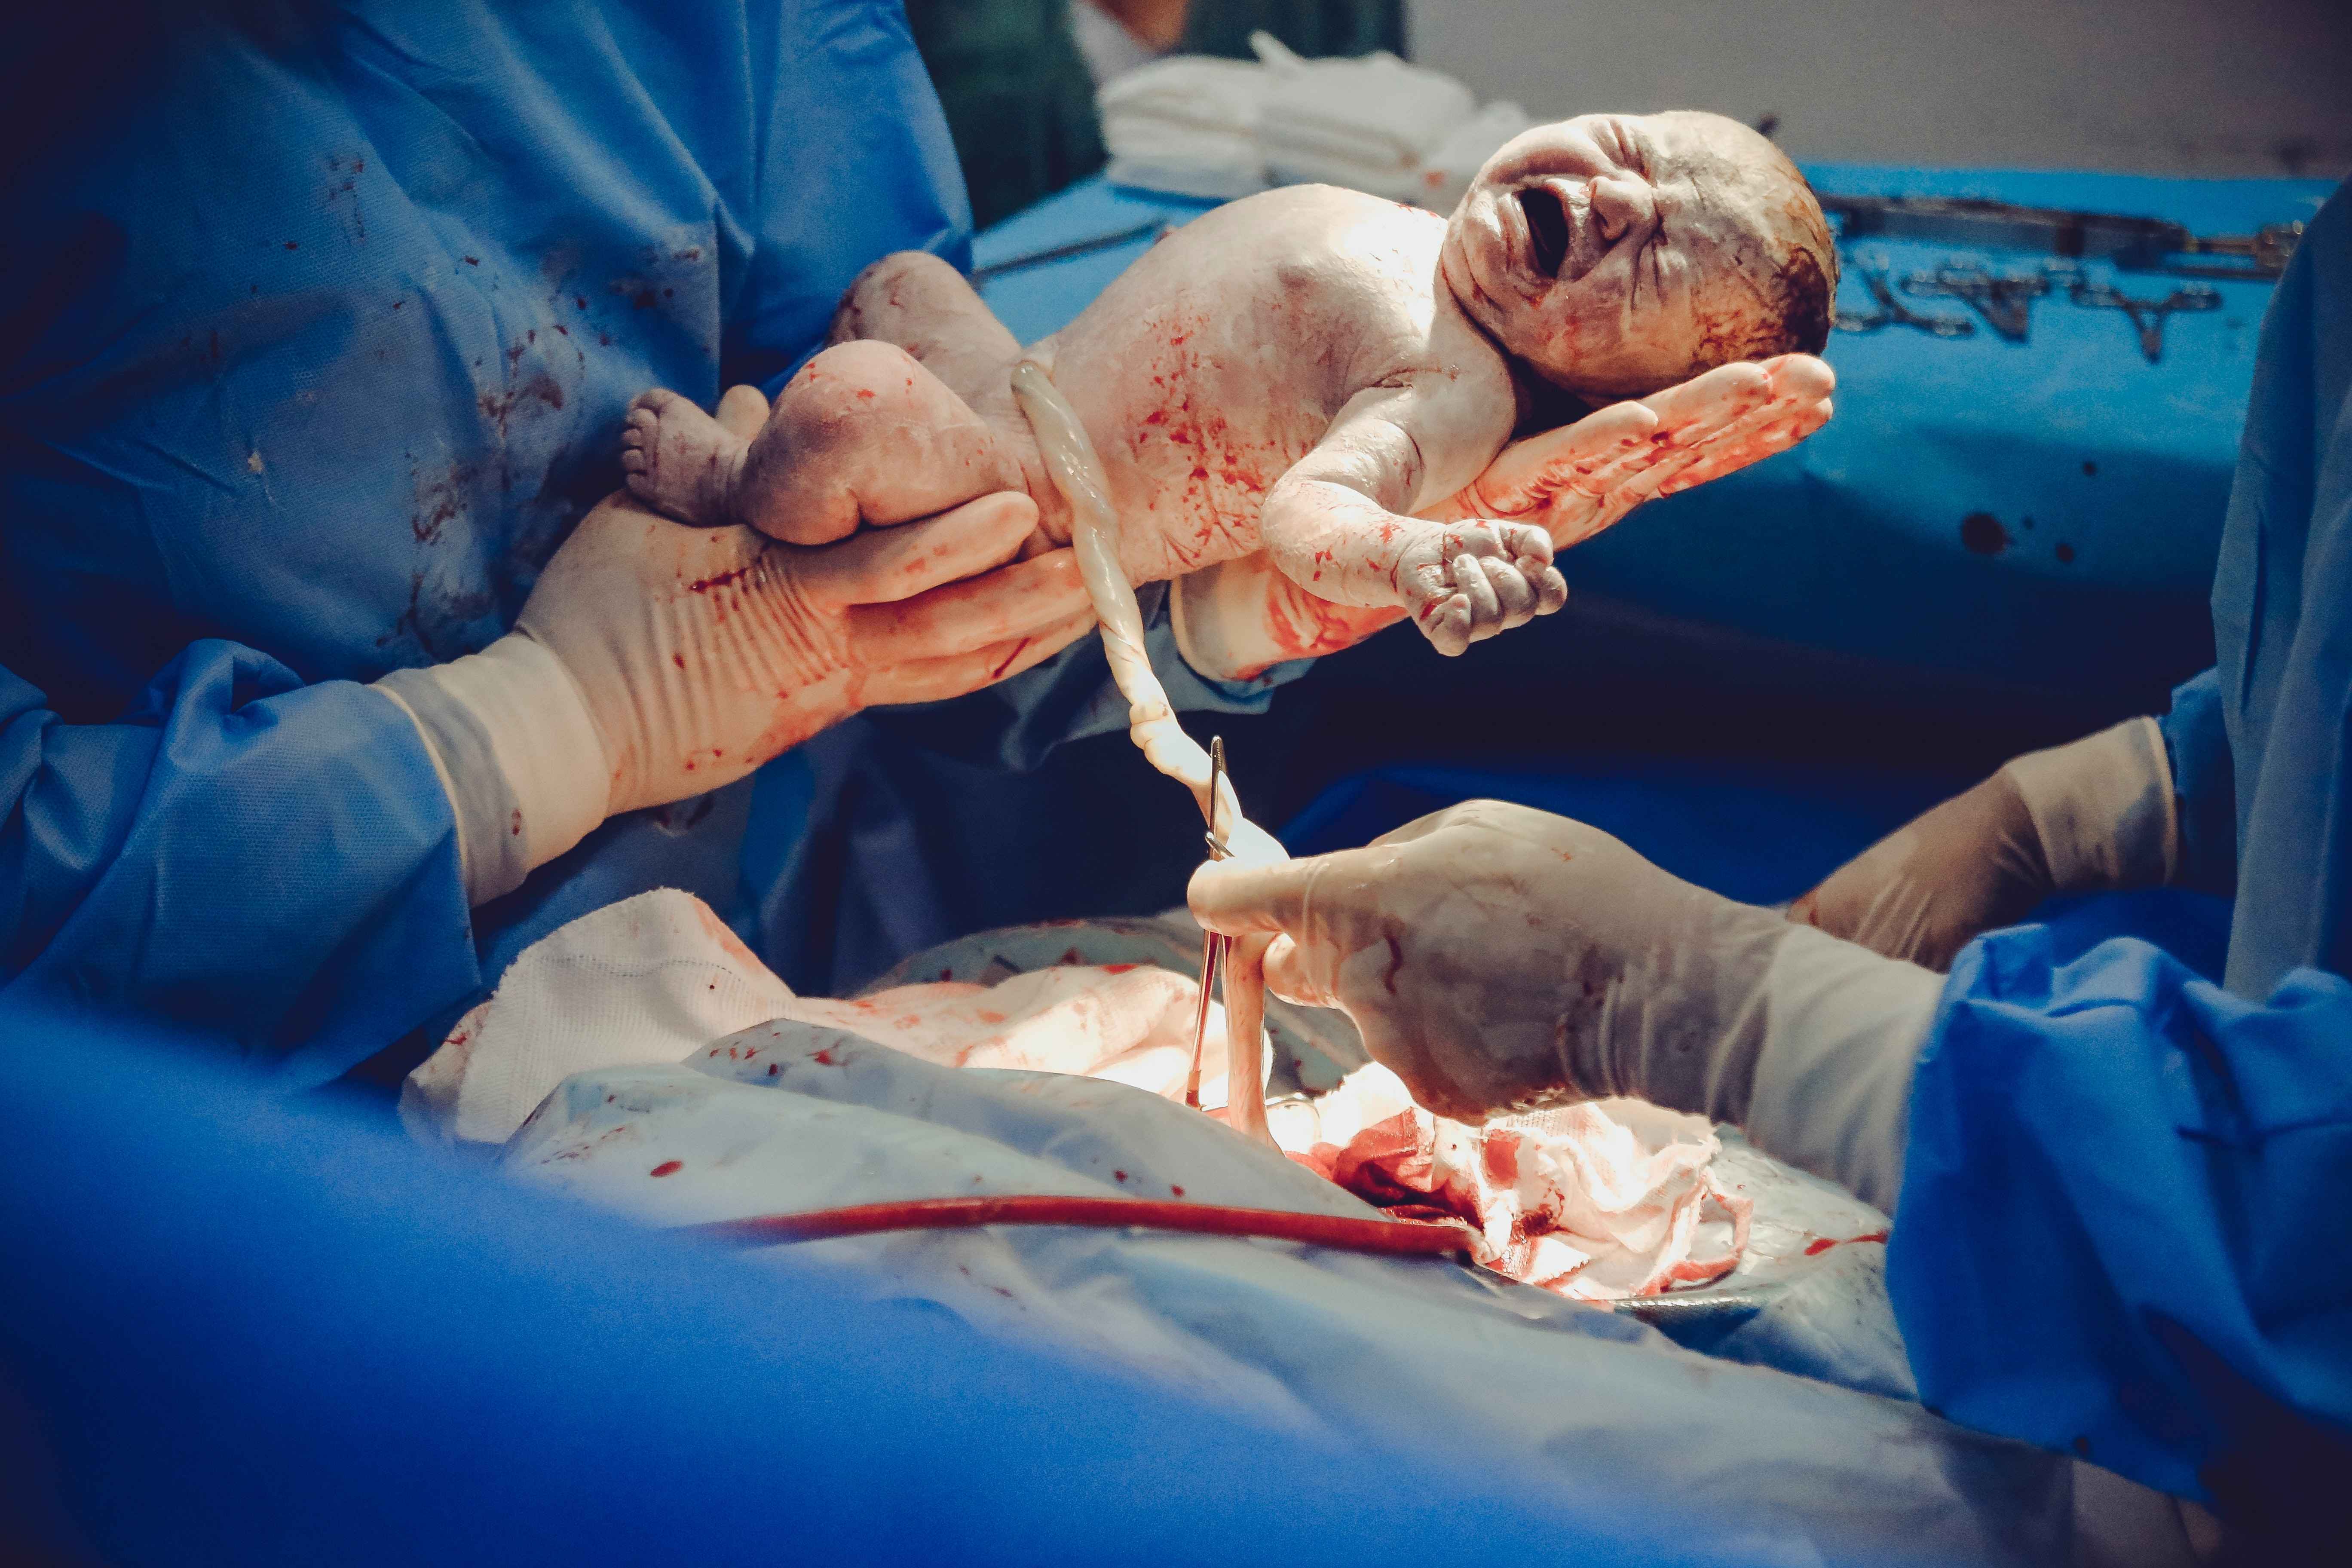 A doctor is holding newborn baby while other doctor is doing surgery during child birth